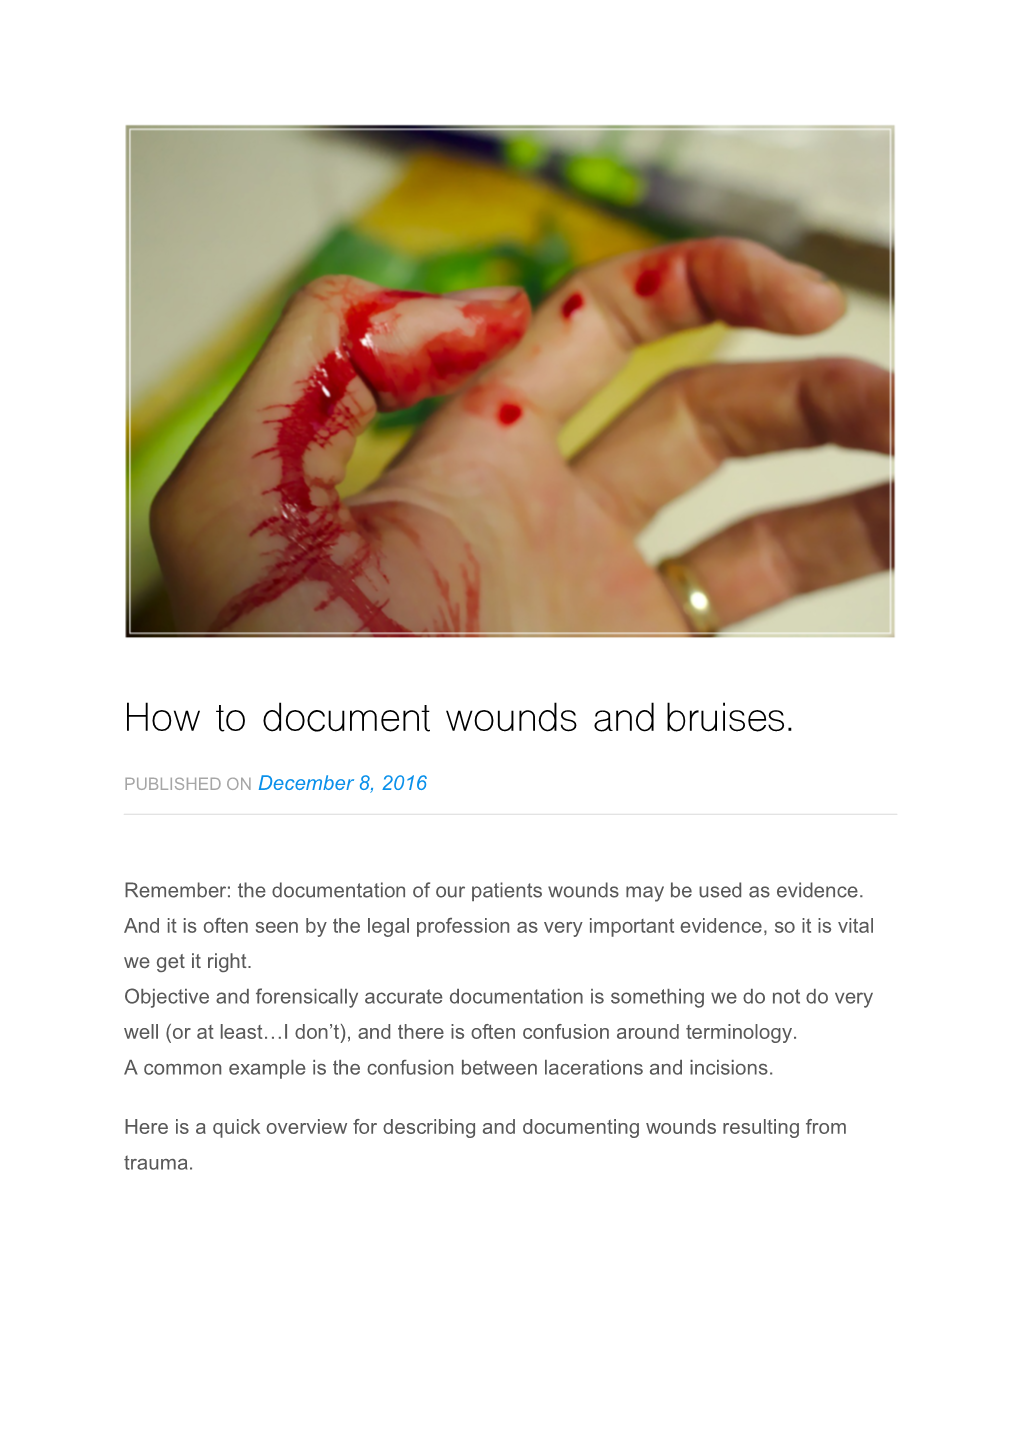 How to Document Wounds and Bruises